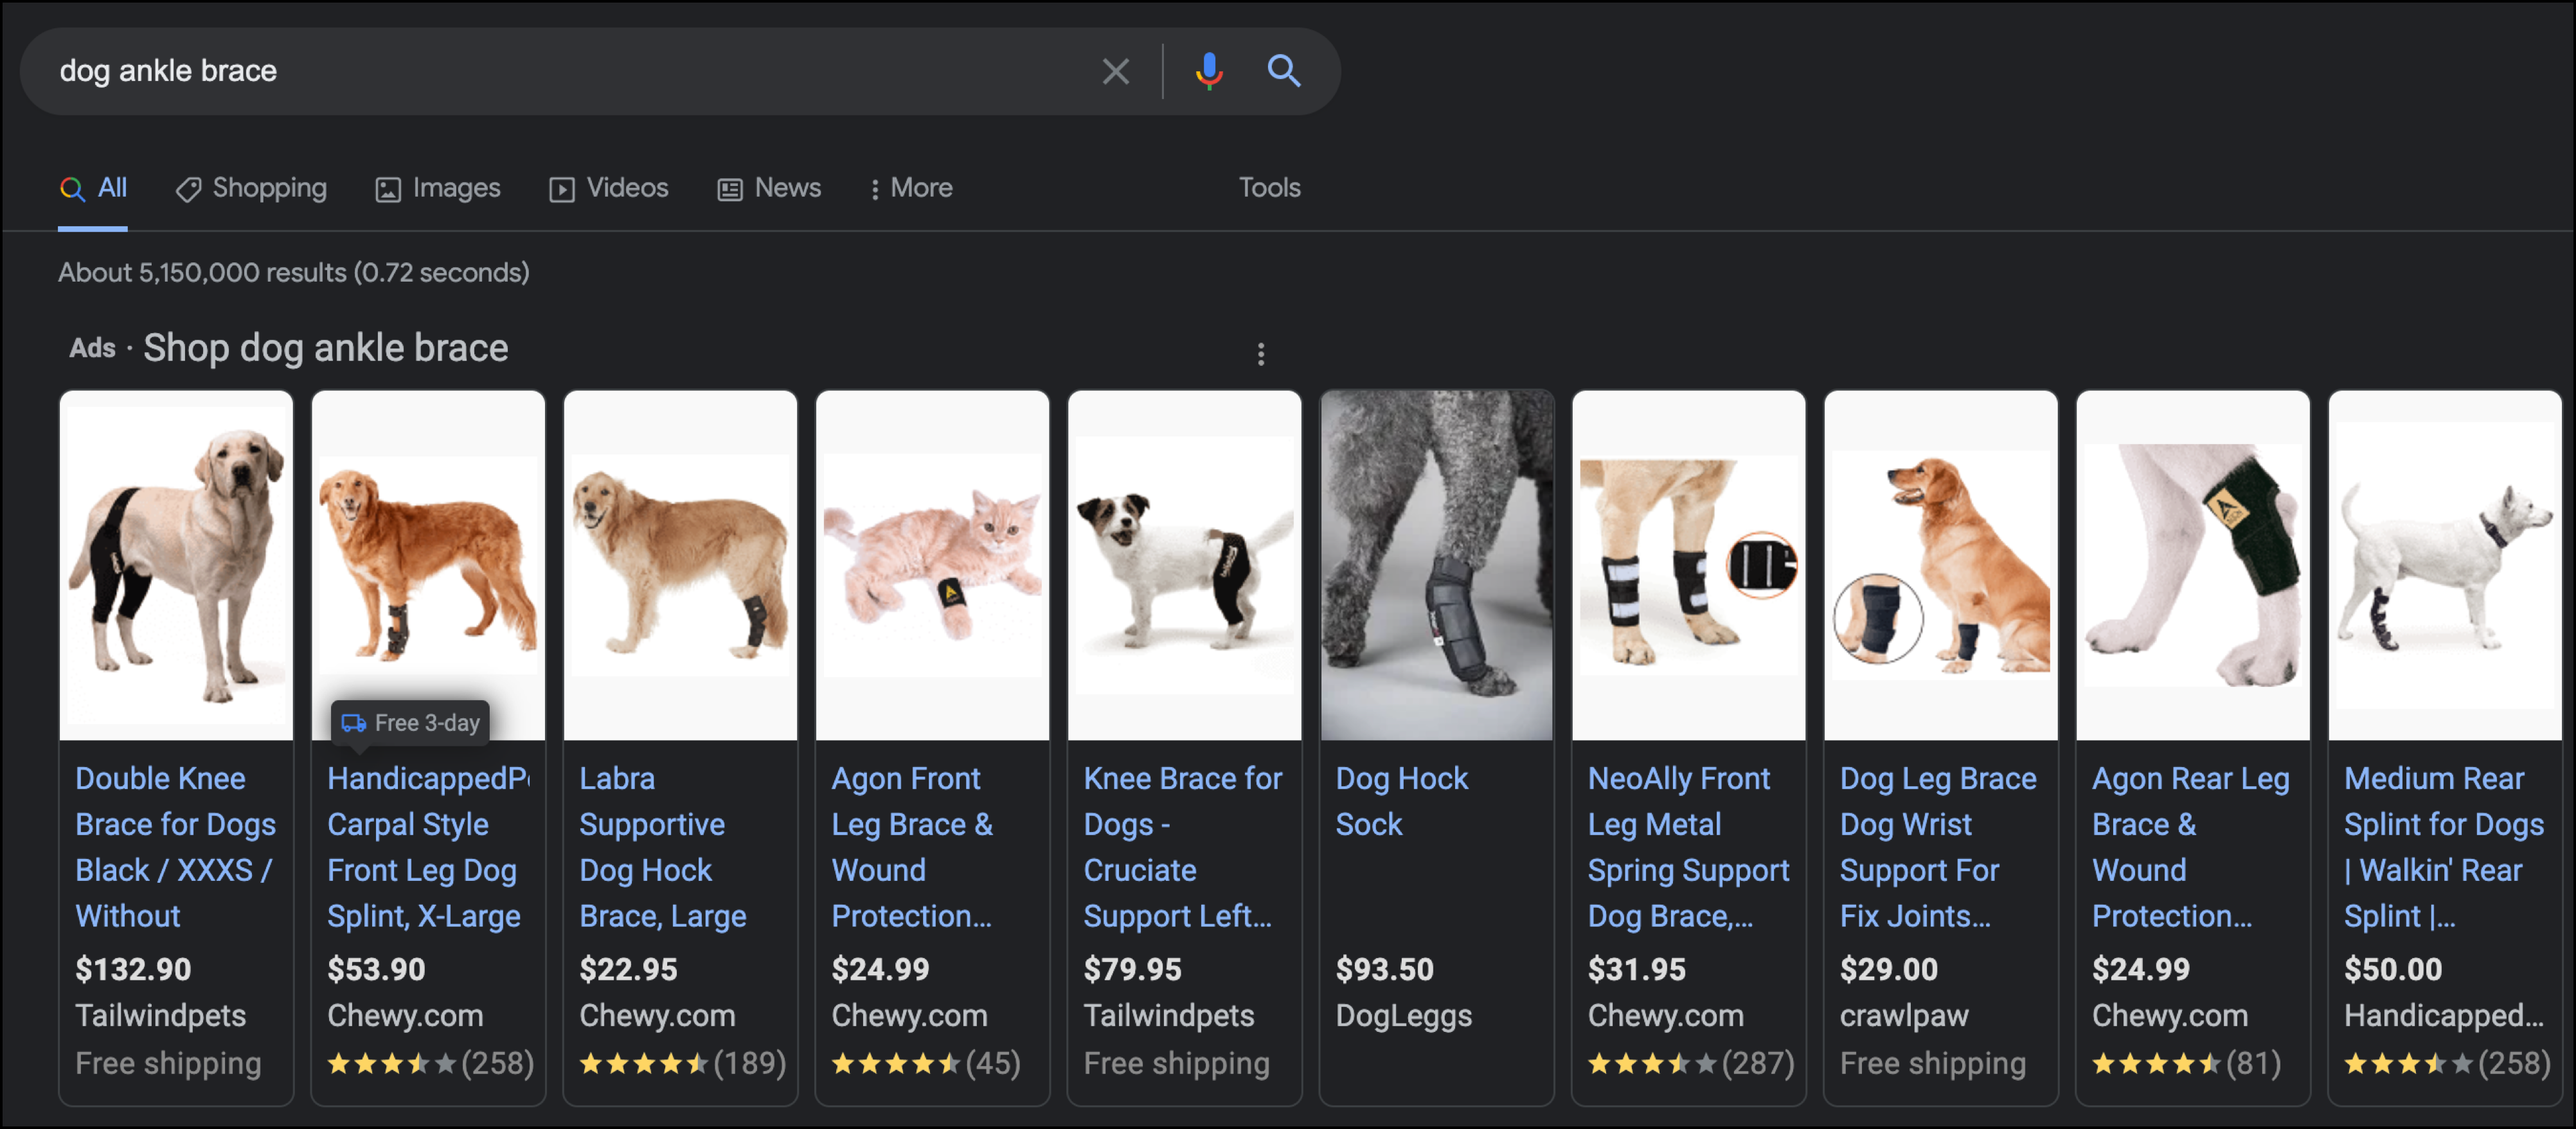 Google Search results for "dog ankle brace"